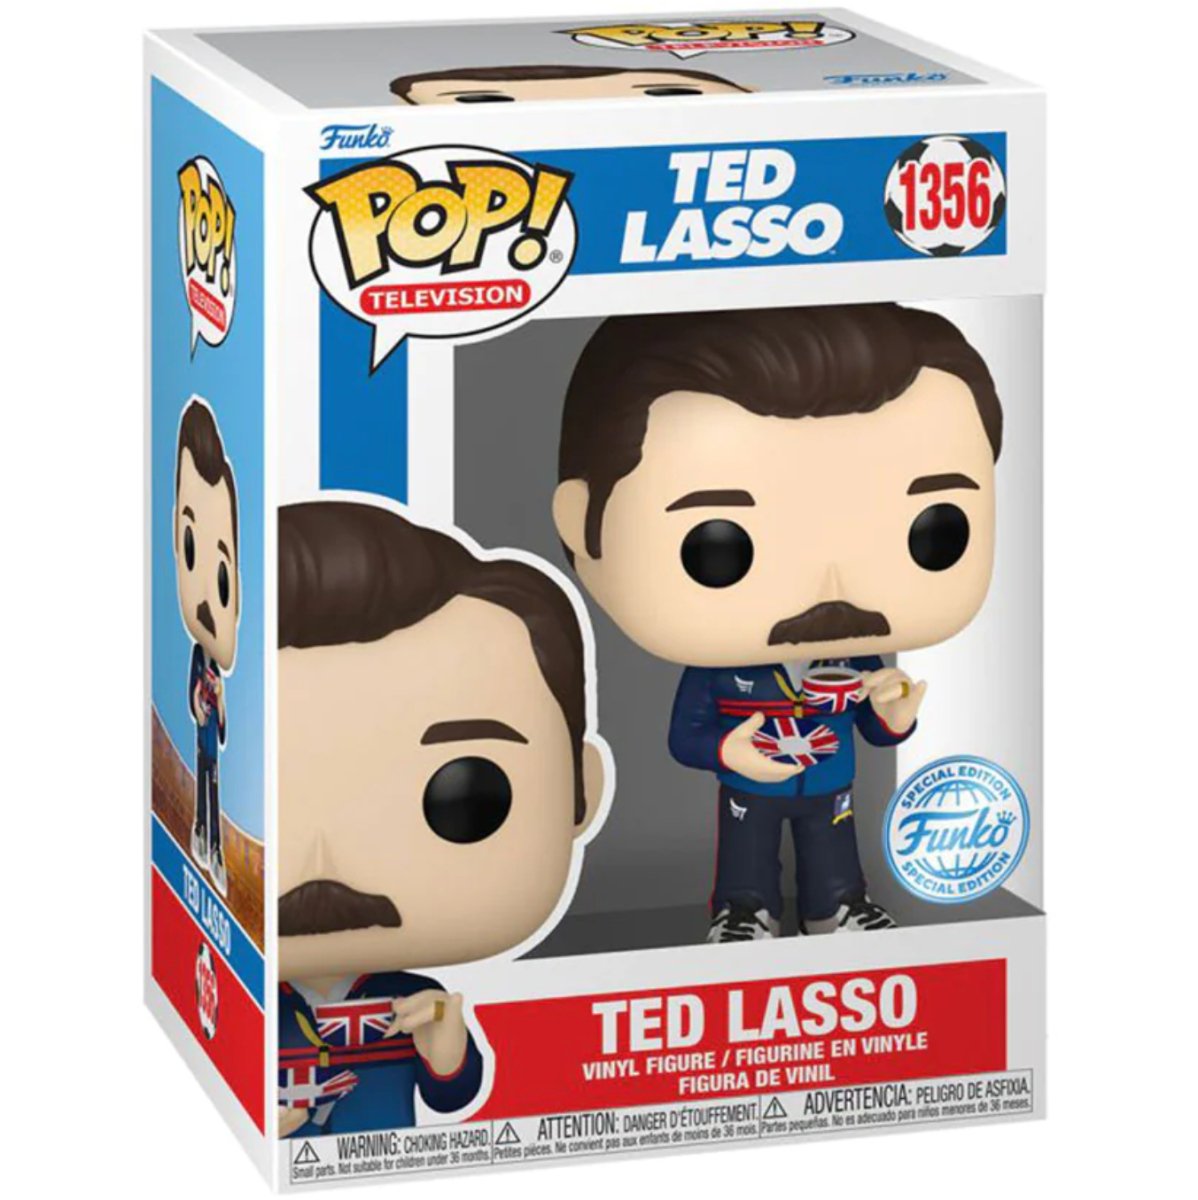 Ted Lasso - Ted Lasso [with Tea Cup] (Special Edition) #1356 - Funko Pop! Vinyl Television - Persona Toys